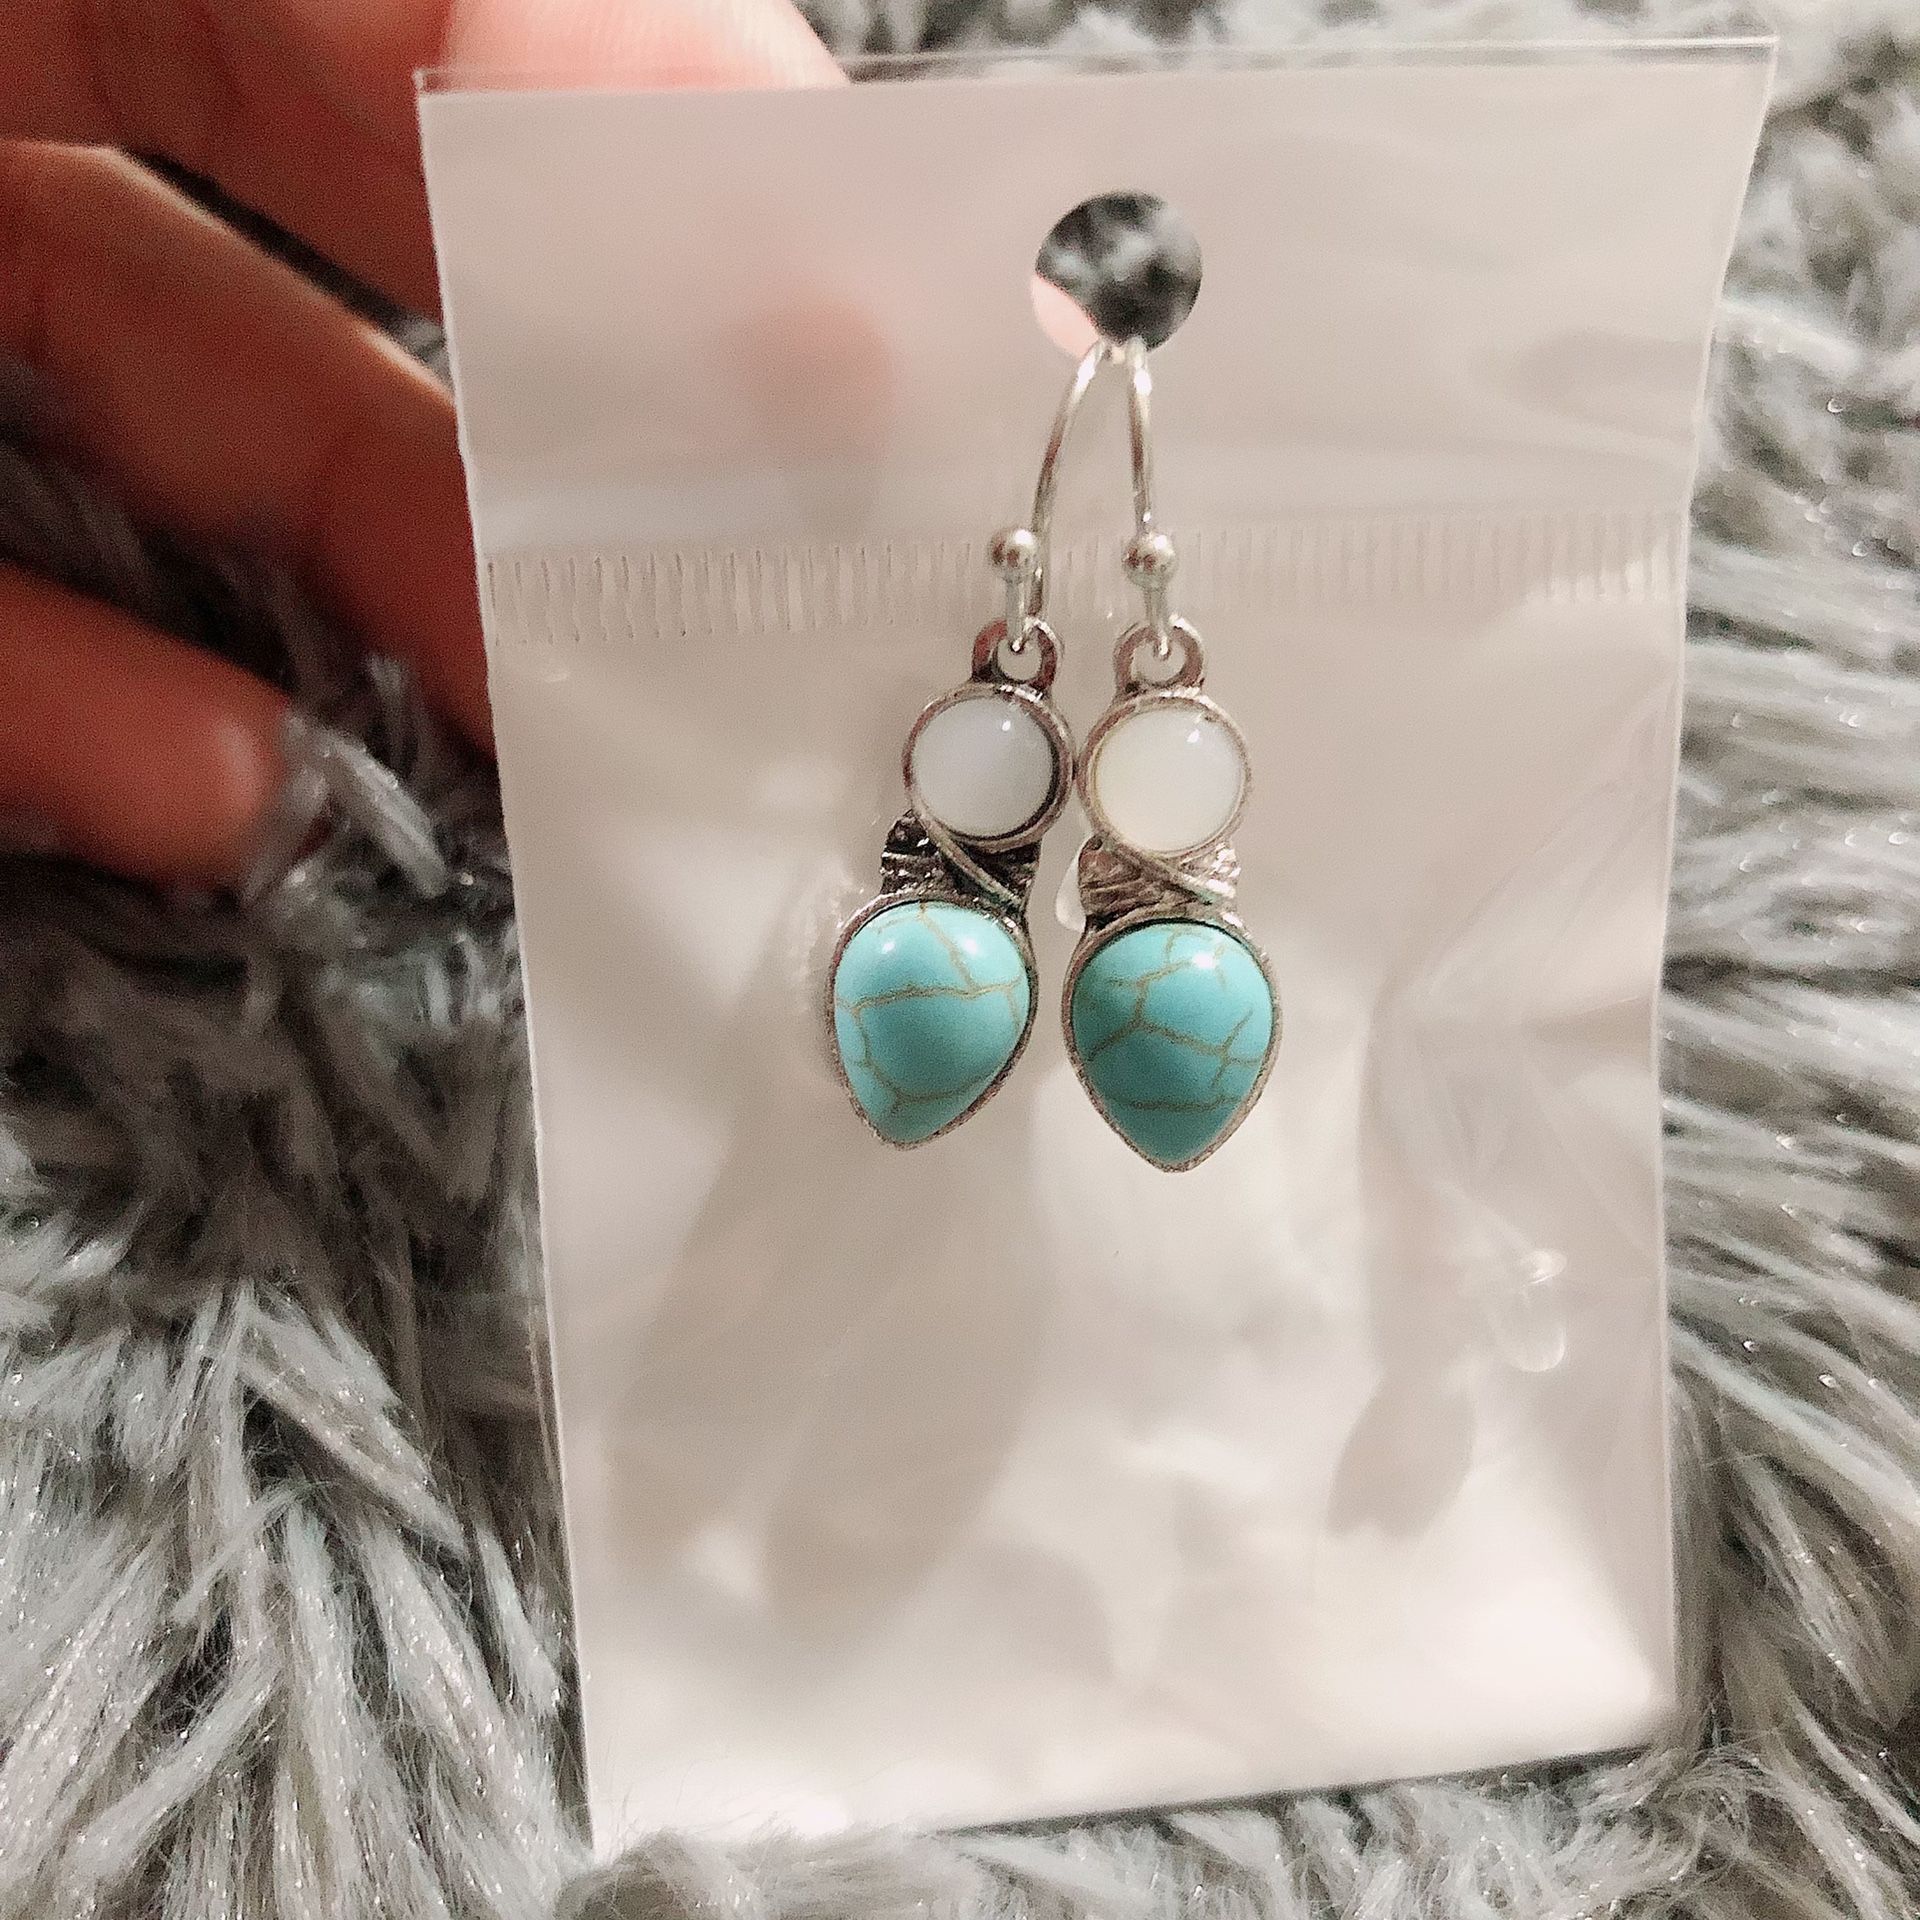 One of the kind earring set